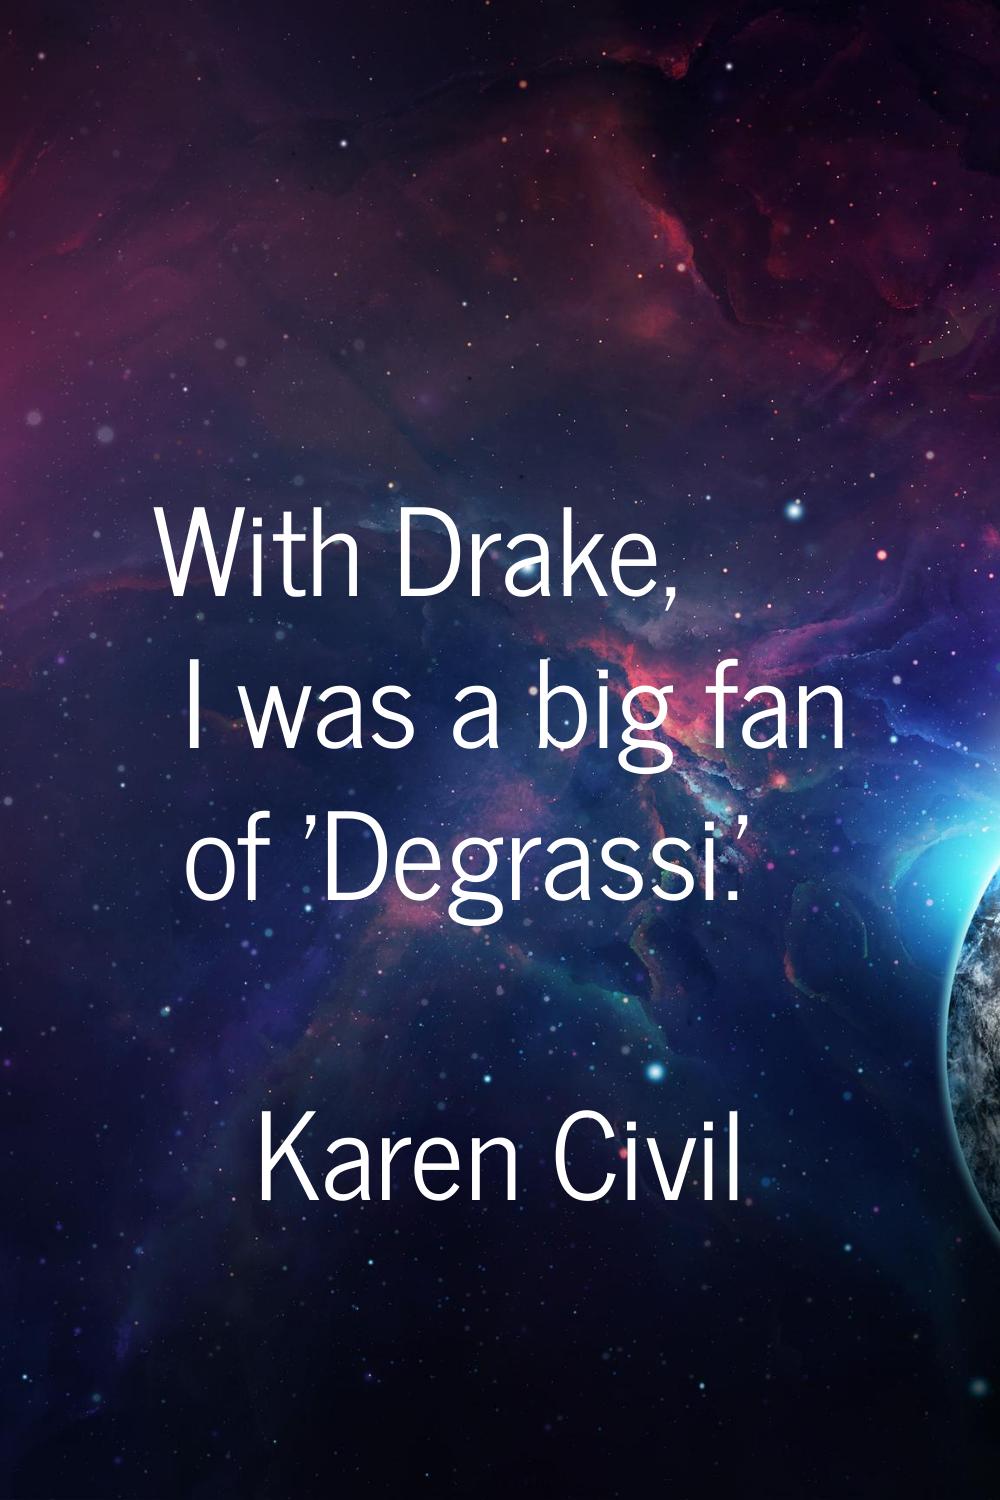 With Drake, I was a big fan of 'Degrassi.'